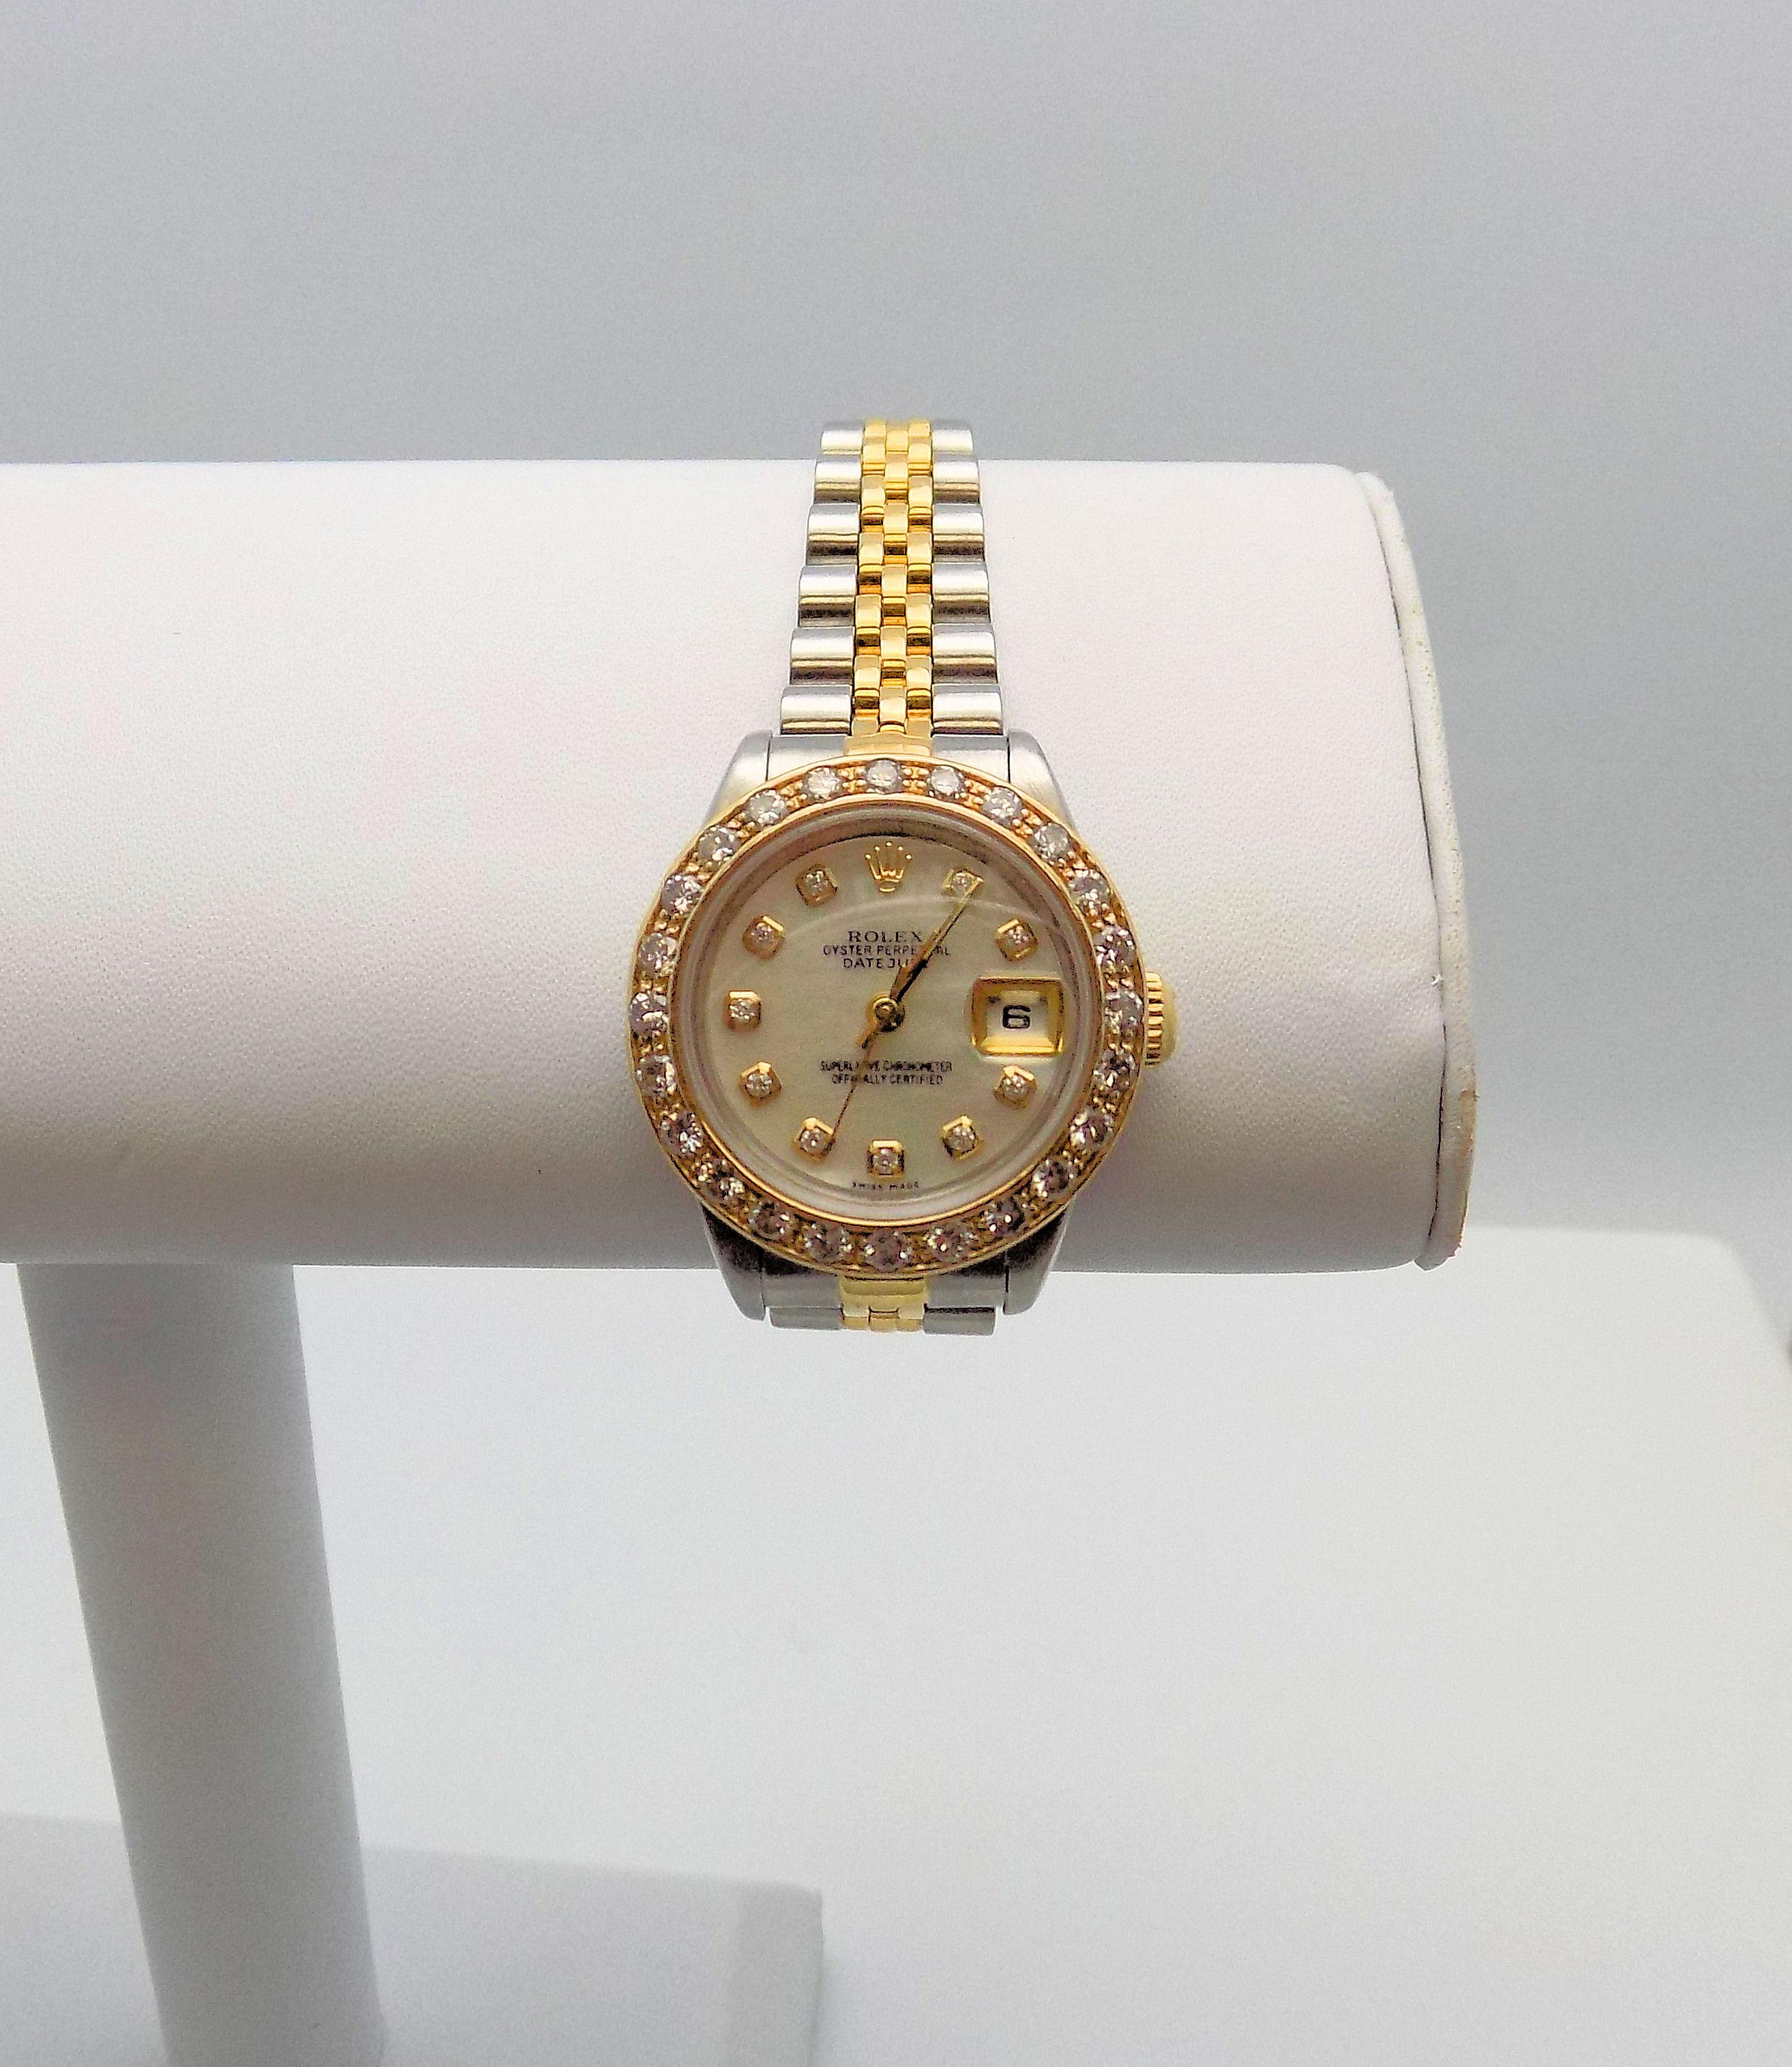 Classic 18 Karat Yellow Gold and Stainless Steel Lady's Wrist Watch by Rolex featuring Oyster Perpetual Date Just Mother of Pearl Dial, 10 Round Brilliant Diamonds, (After Market Bezel) 24 Round Brilliant Diamonds 1.25 Carat Total Weight, SI, H, 1